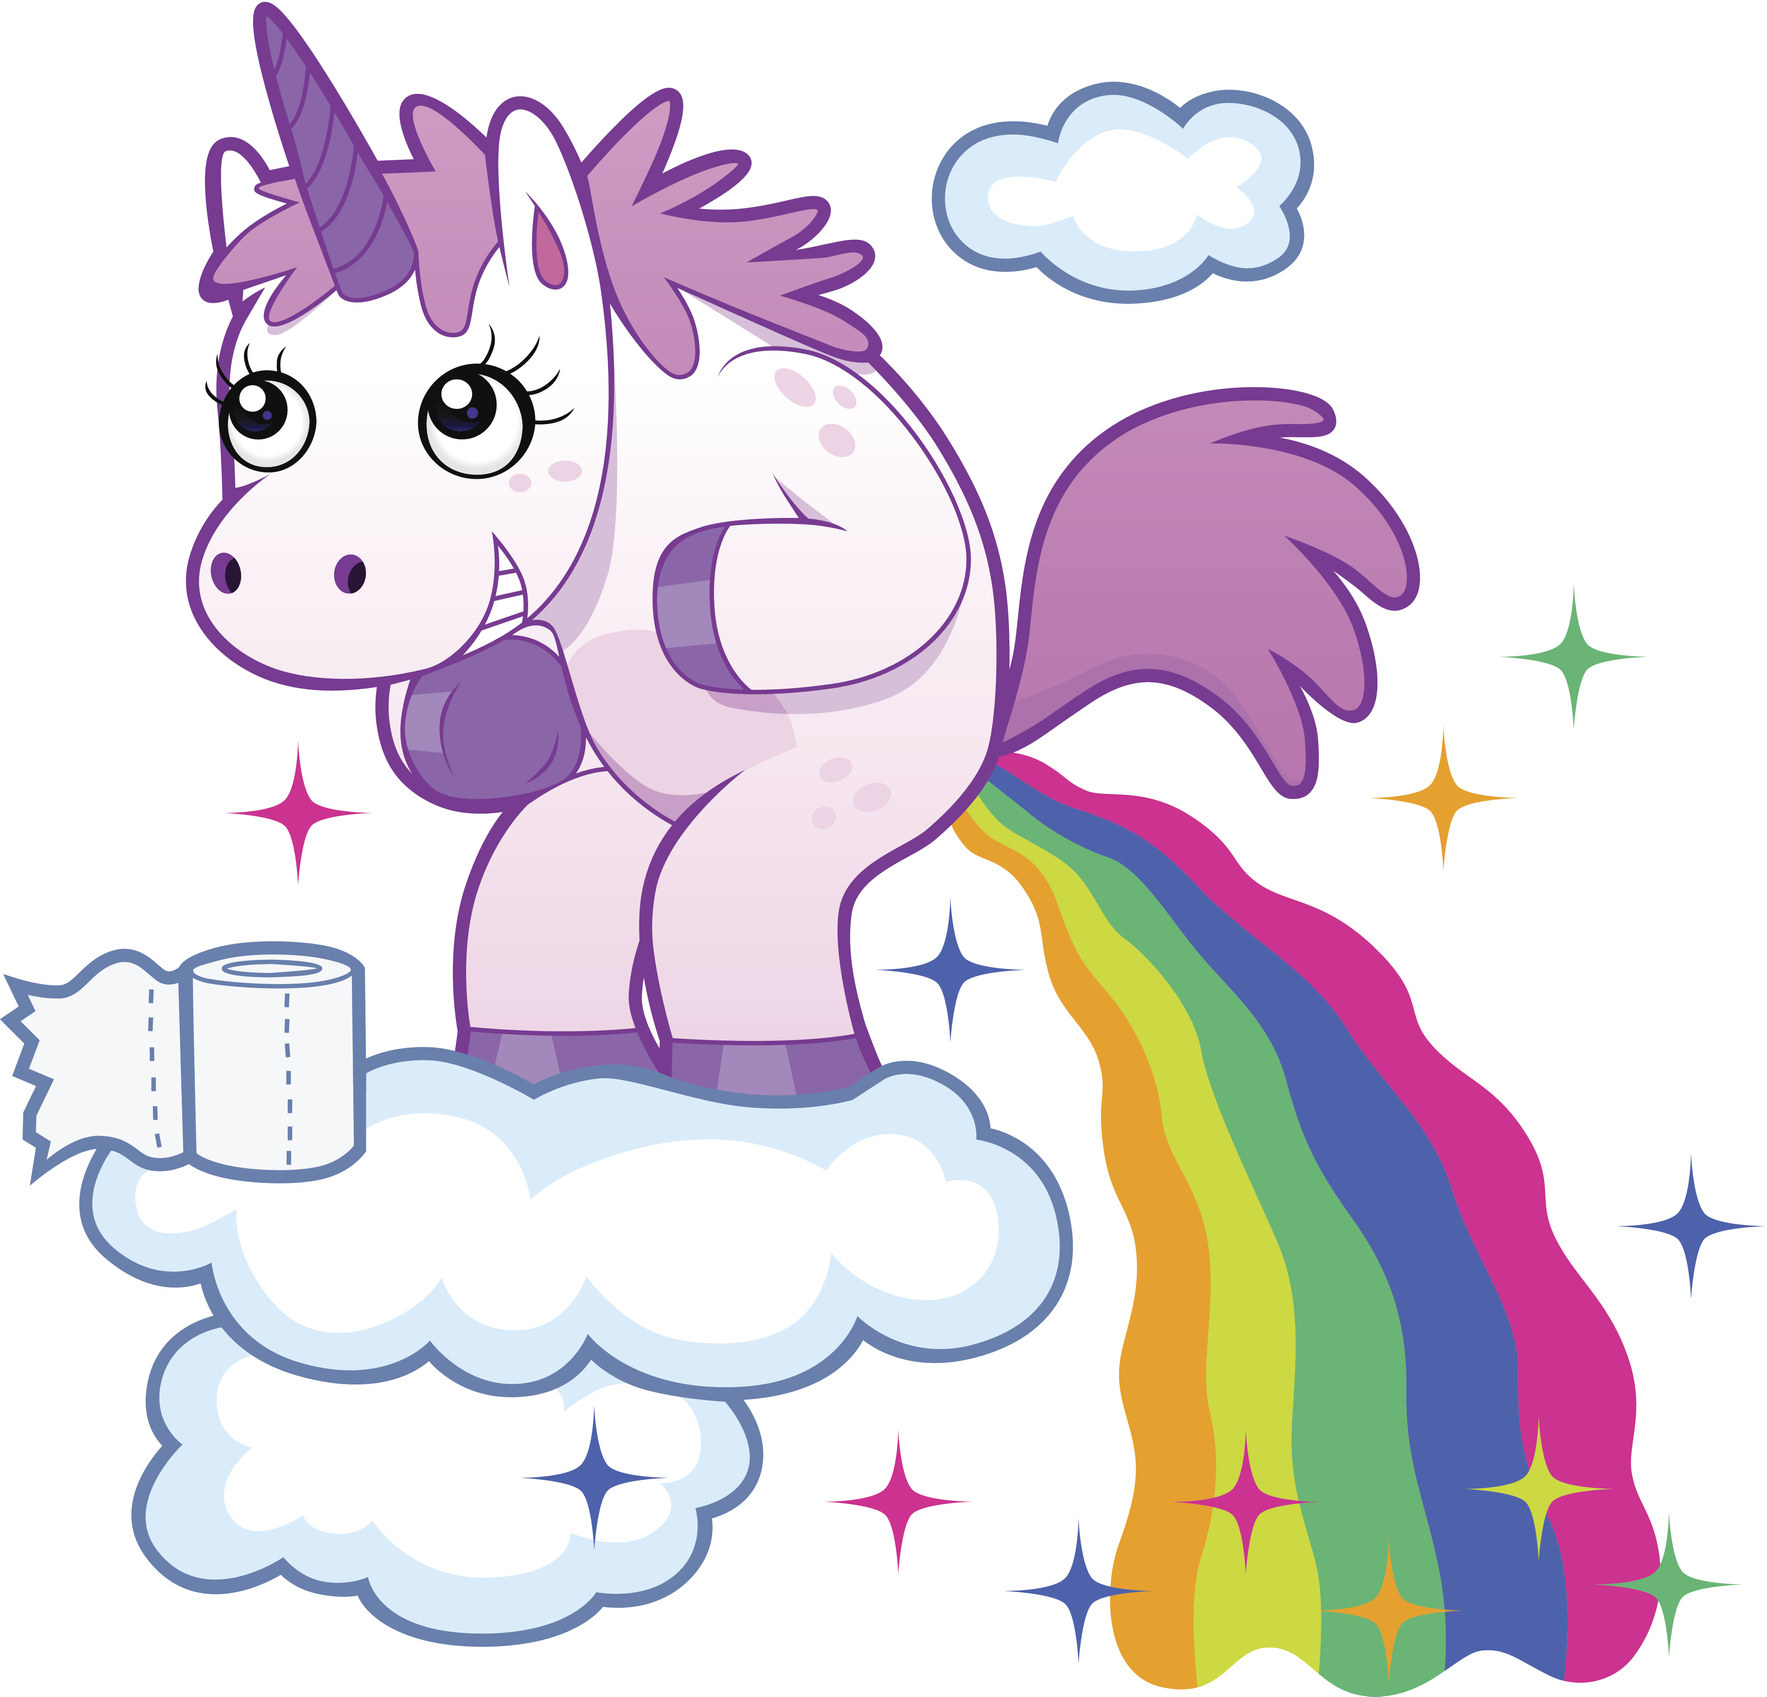 Smiling unicorn pooping a rainbow on the sky.